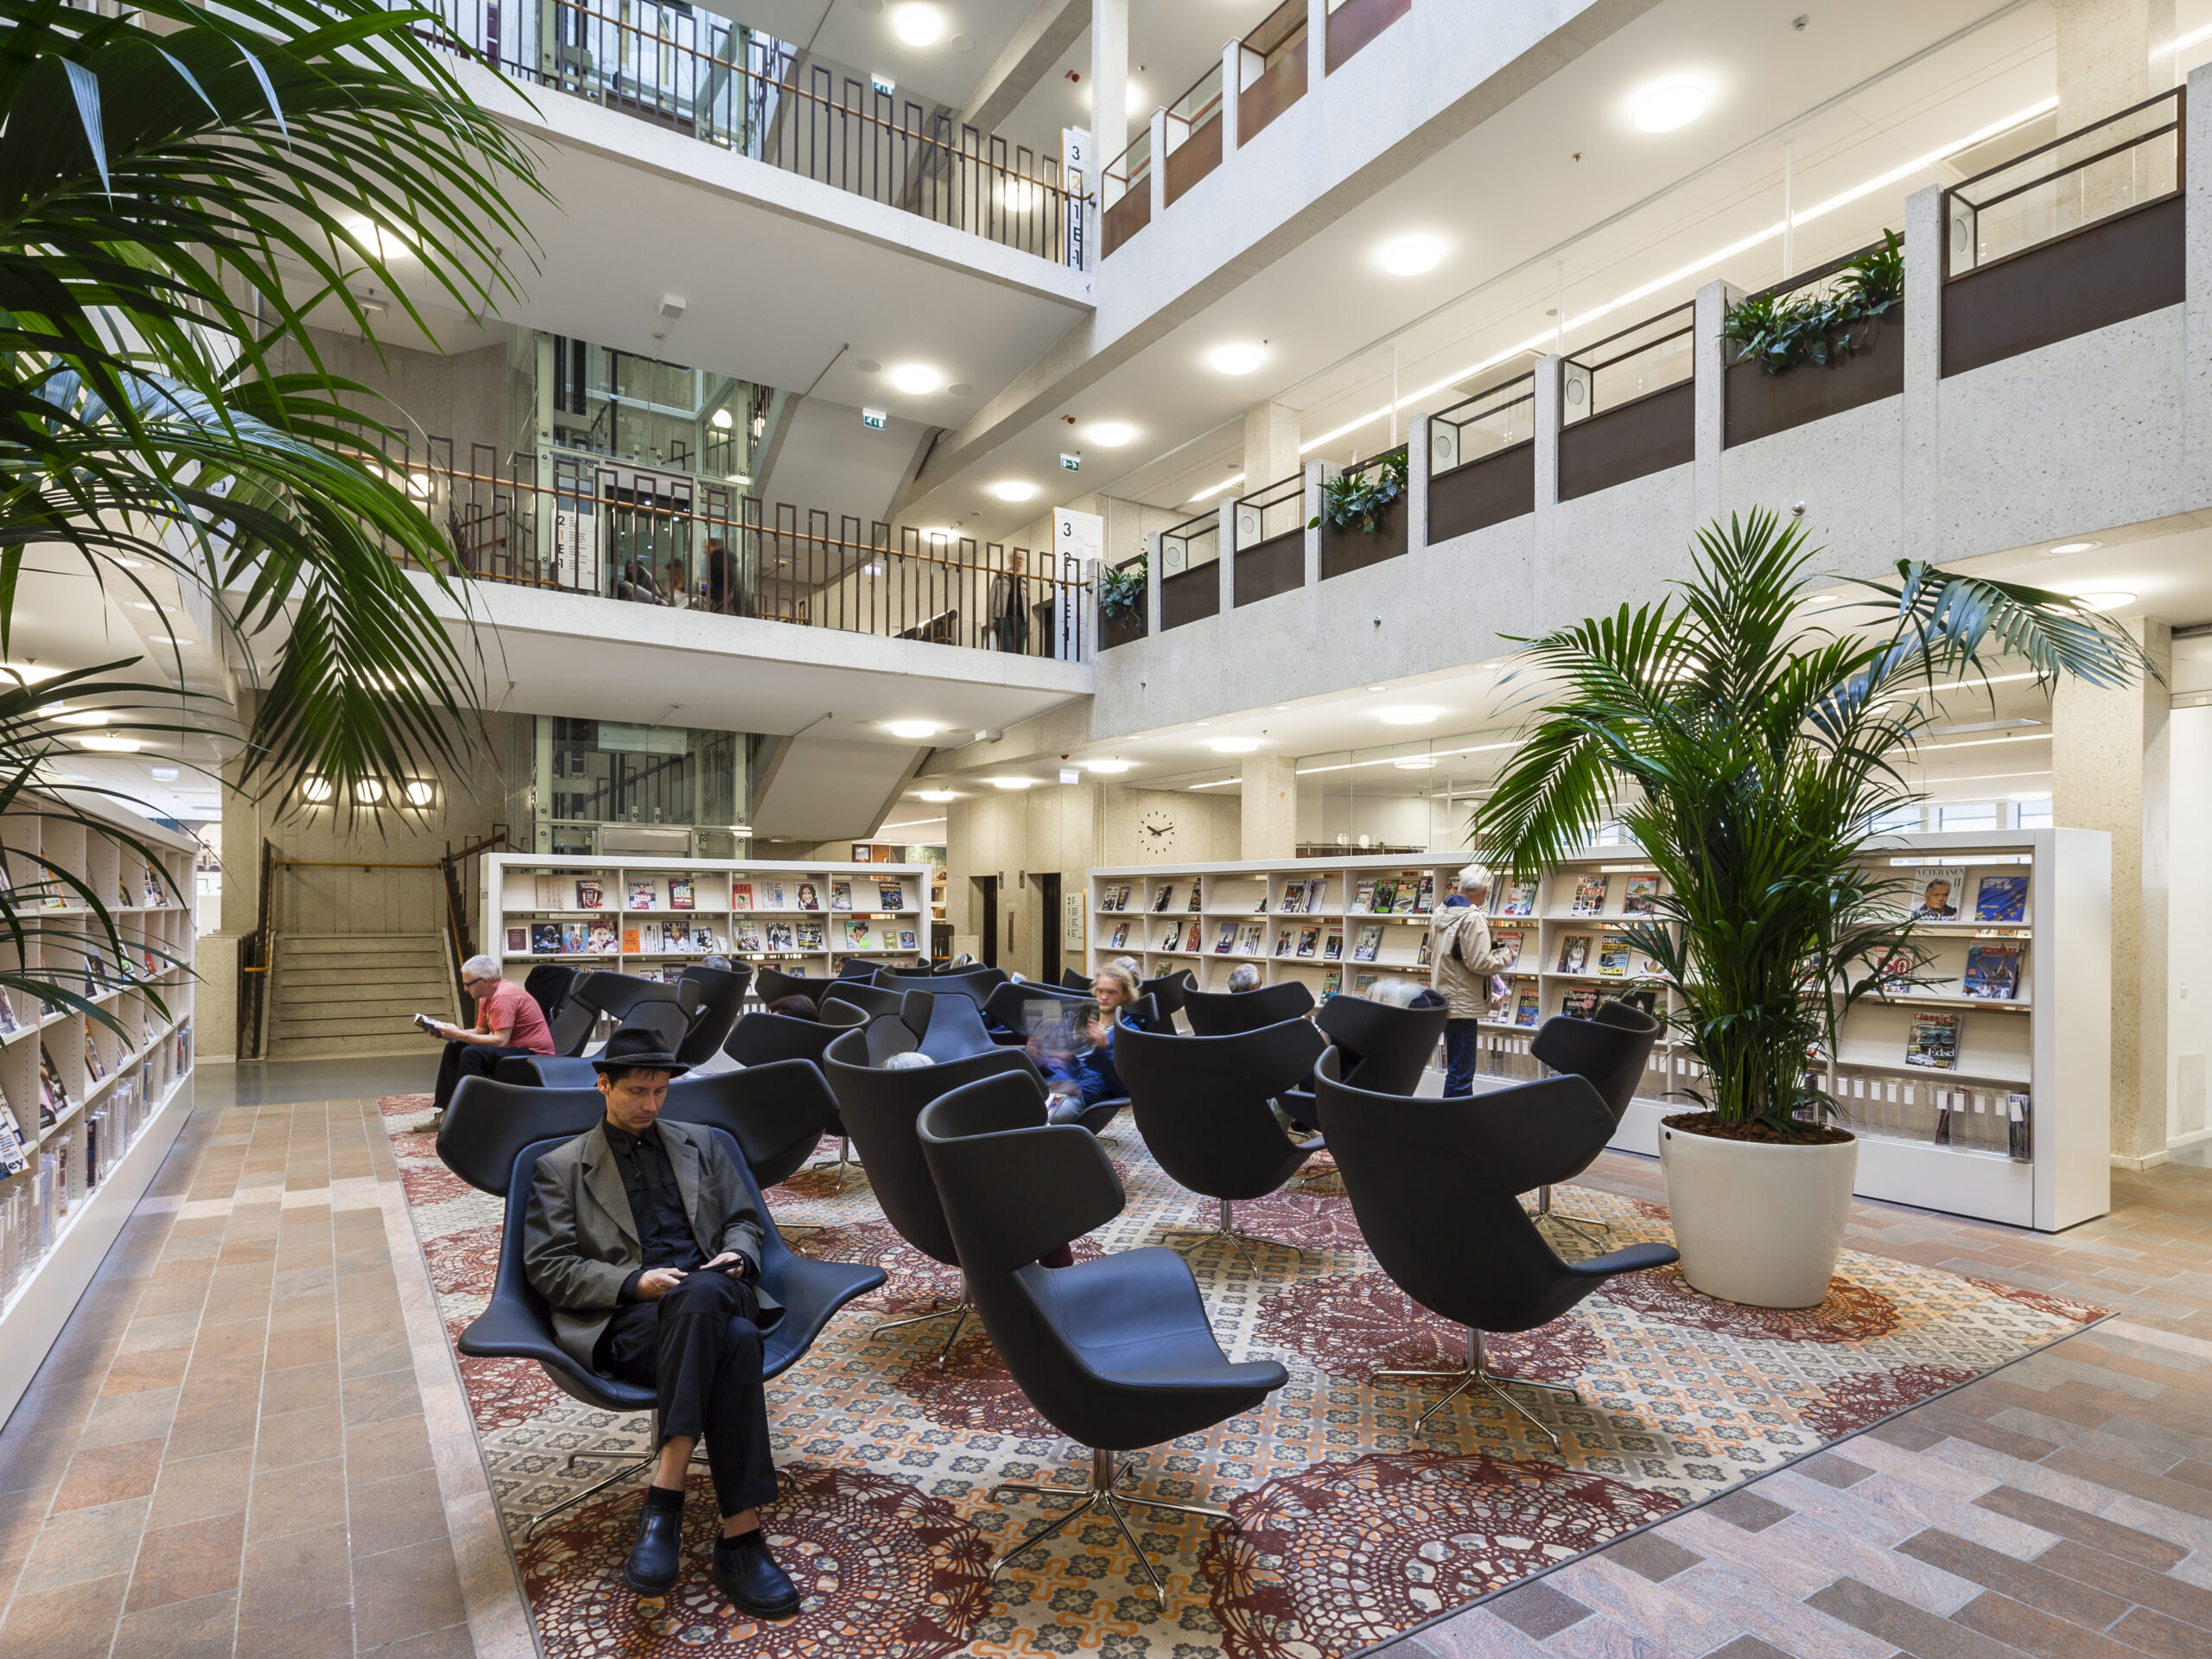 oyster-michael-sodeau-library-gothenburg-sweden-offecct-10400-1-scaled.jpg